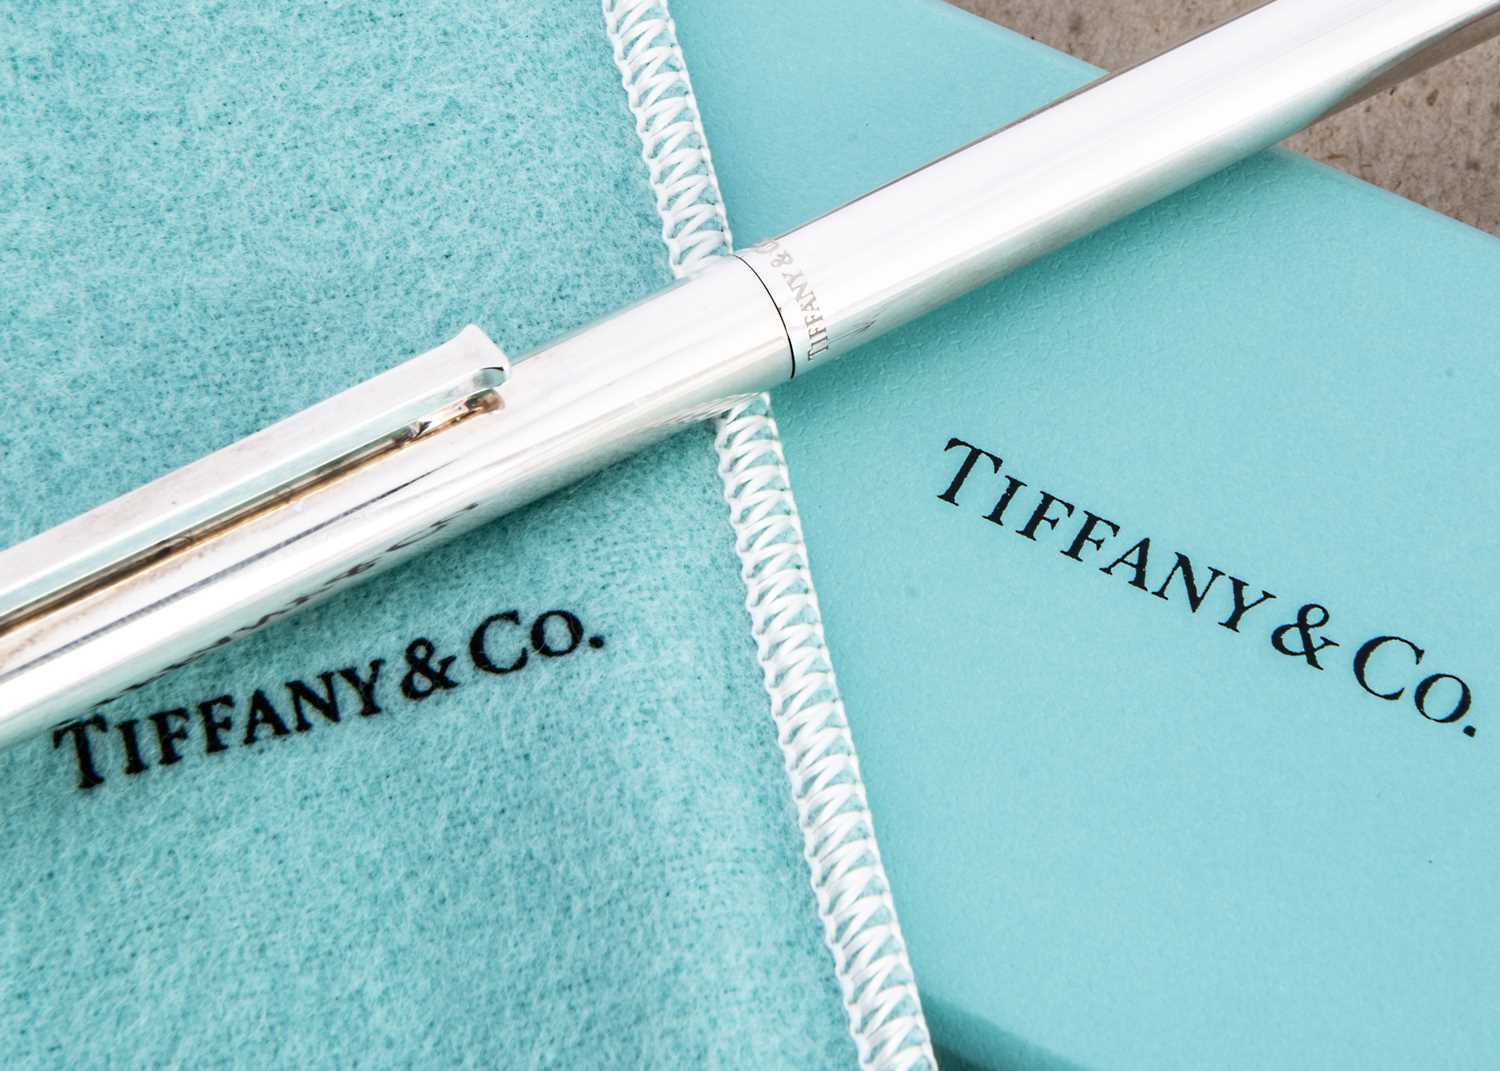 A modern silver biro from Tiffany & Co, - Image 2 of 2